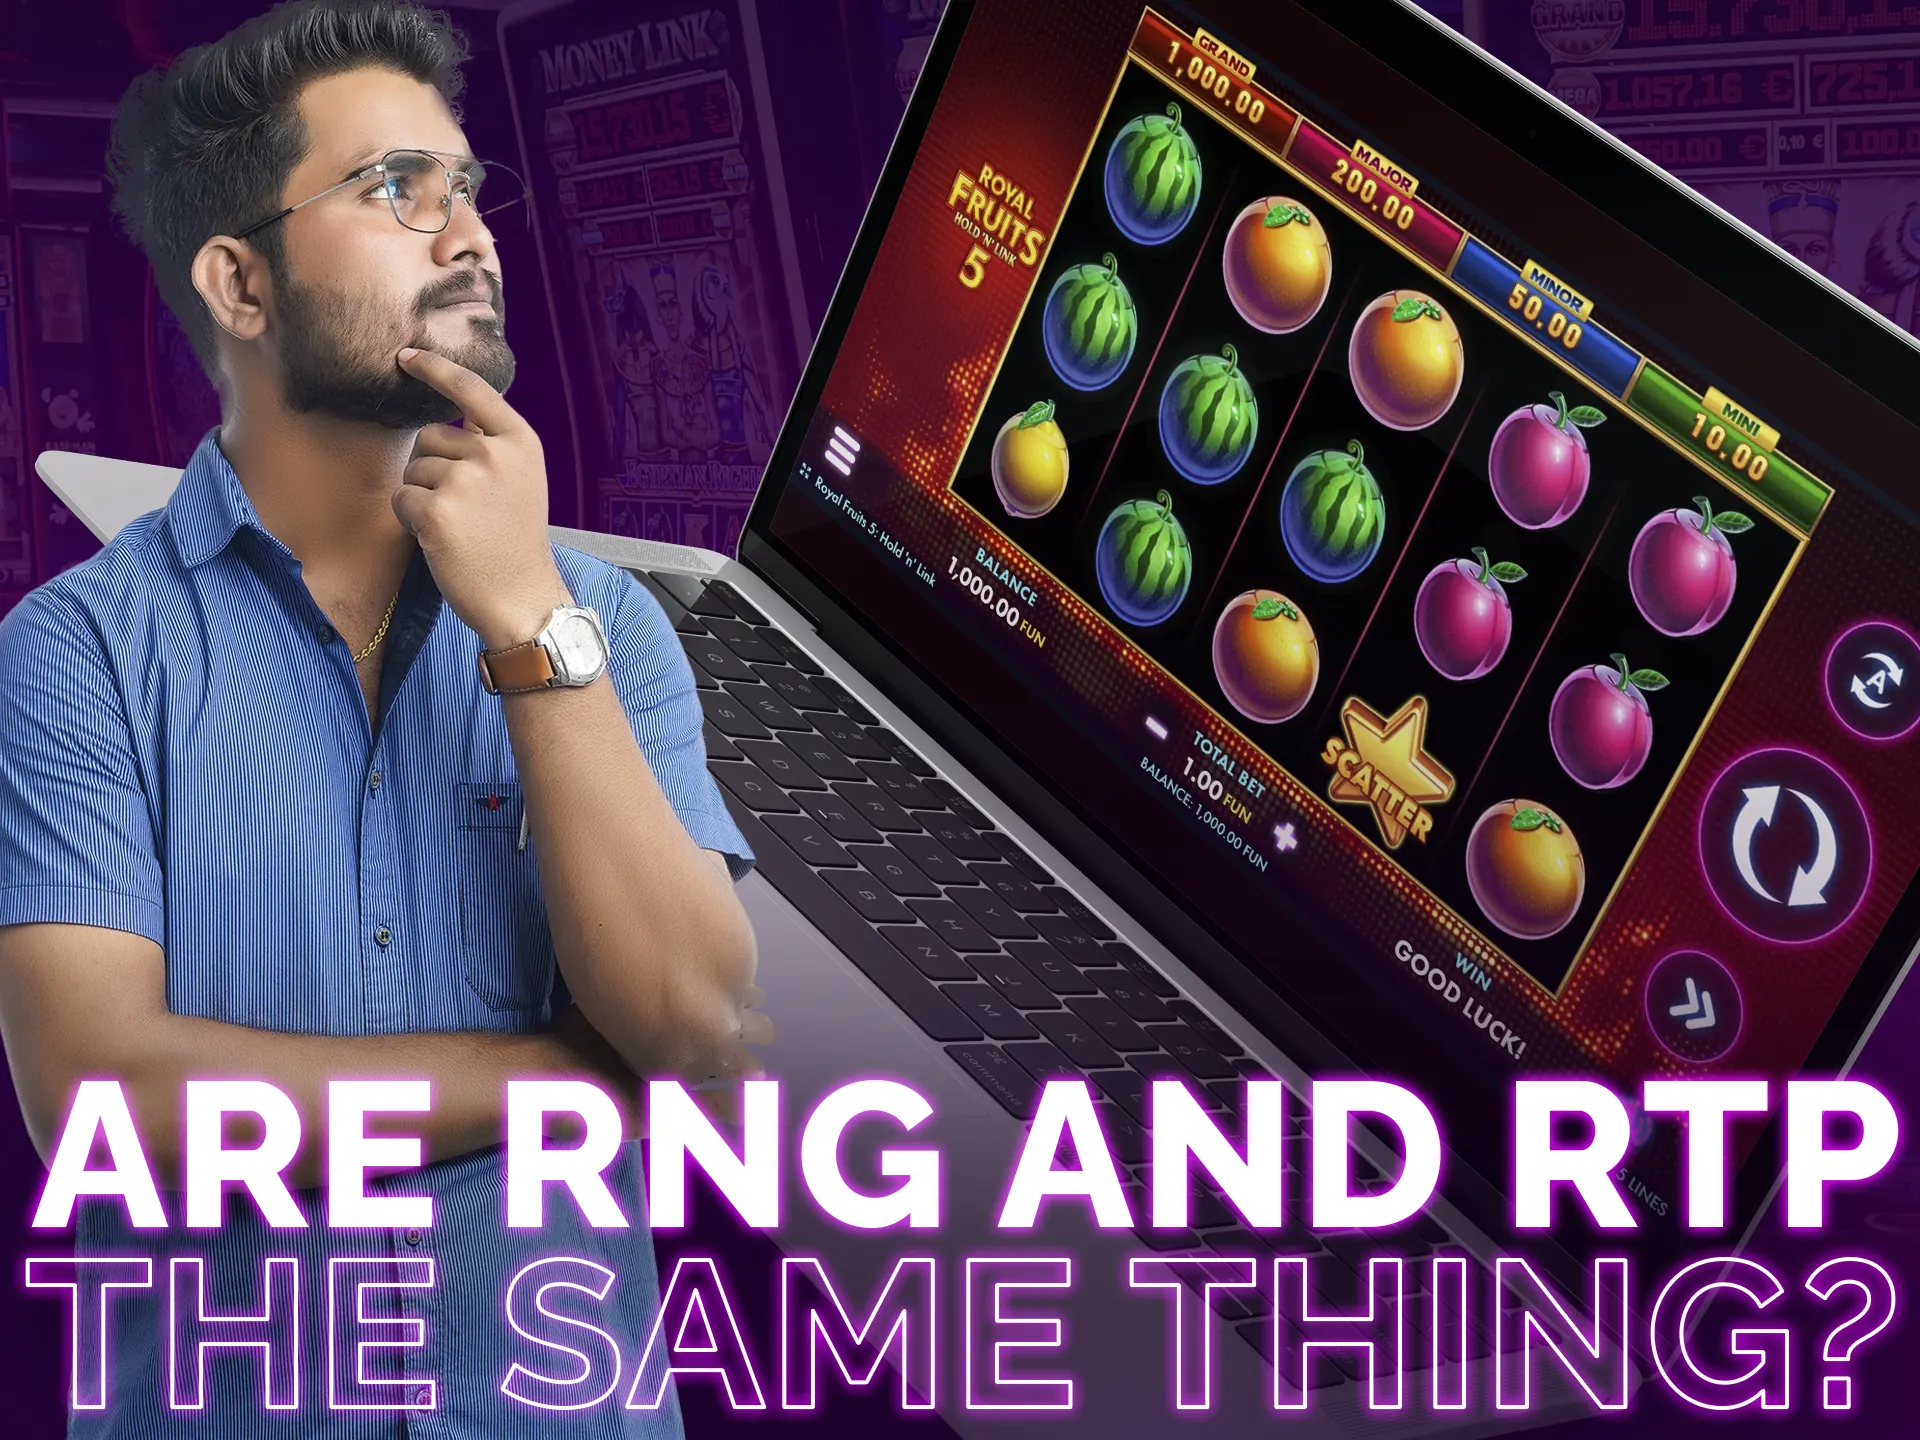 RNG and RTP are different but interconnected in slot machines.